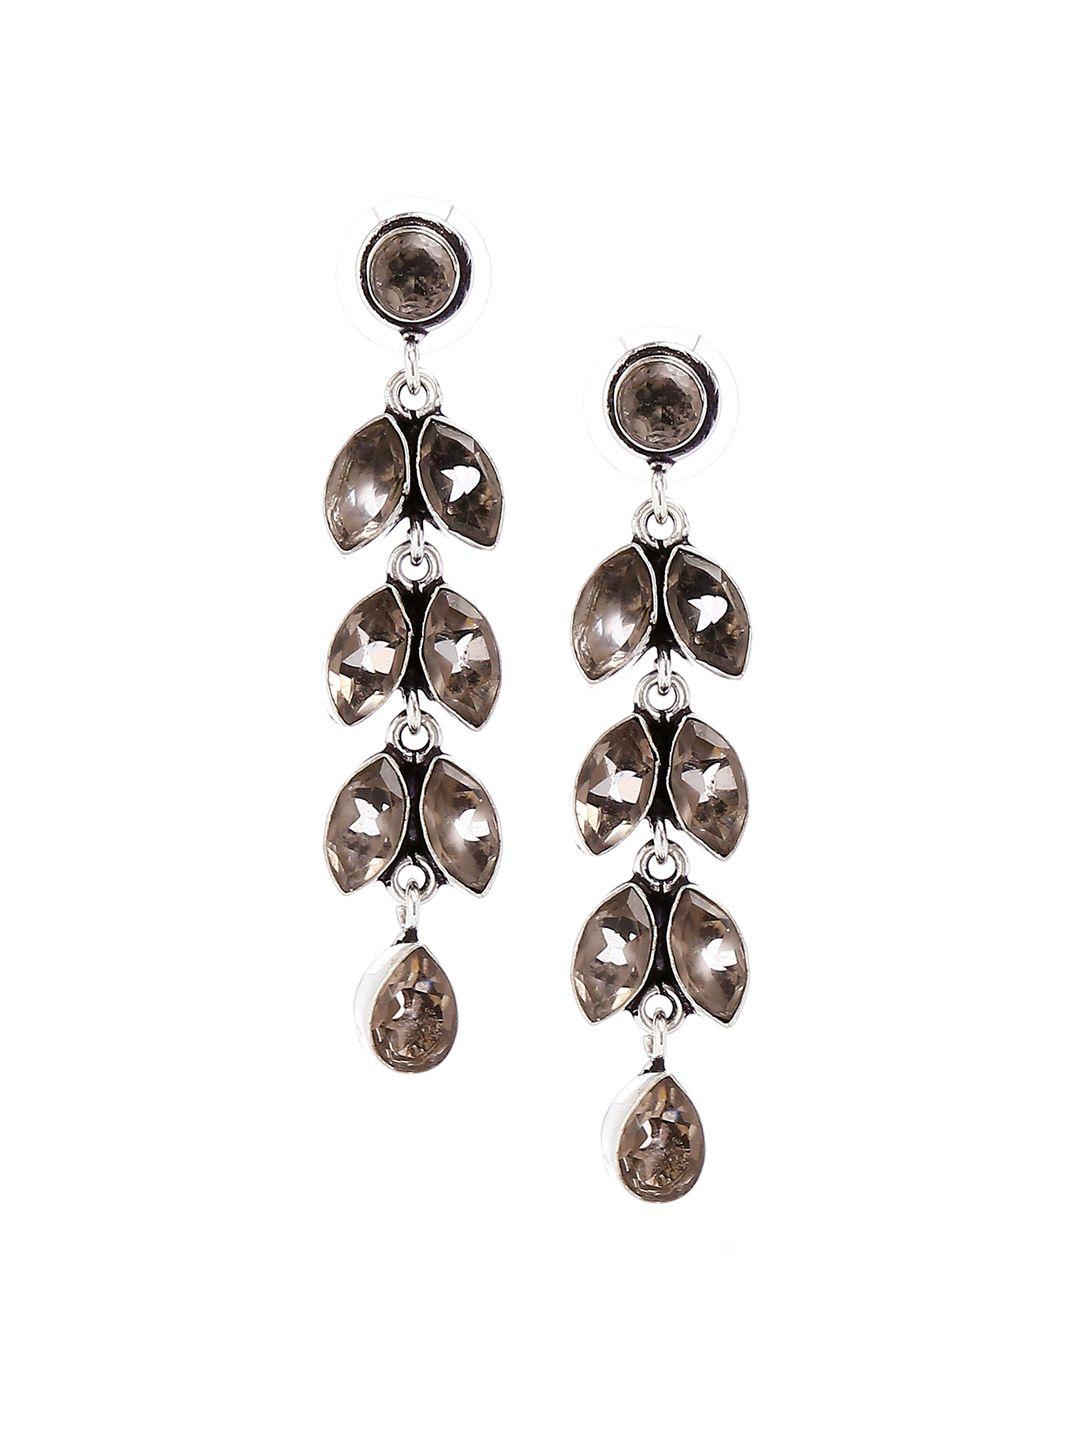 bamboo tree jewels transparent & silver-toned contemporary drop earrings